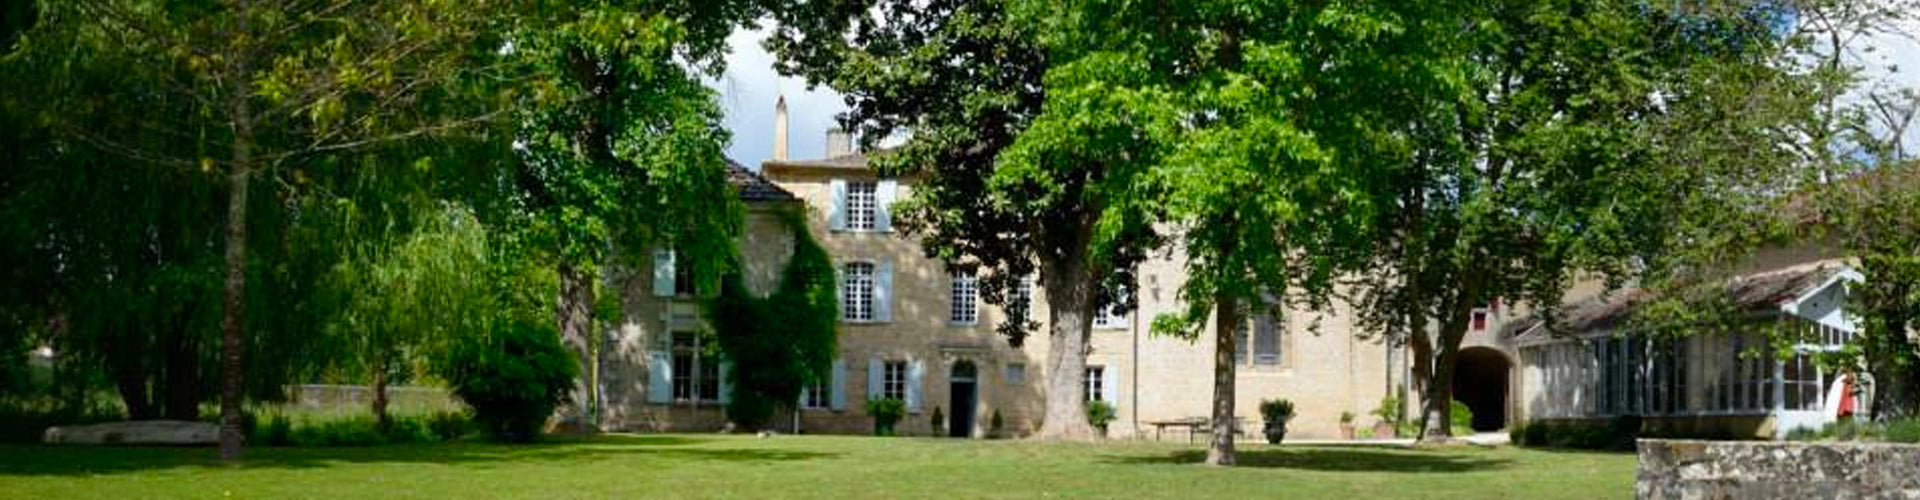 The Château des Antonins in Graves